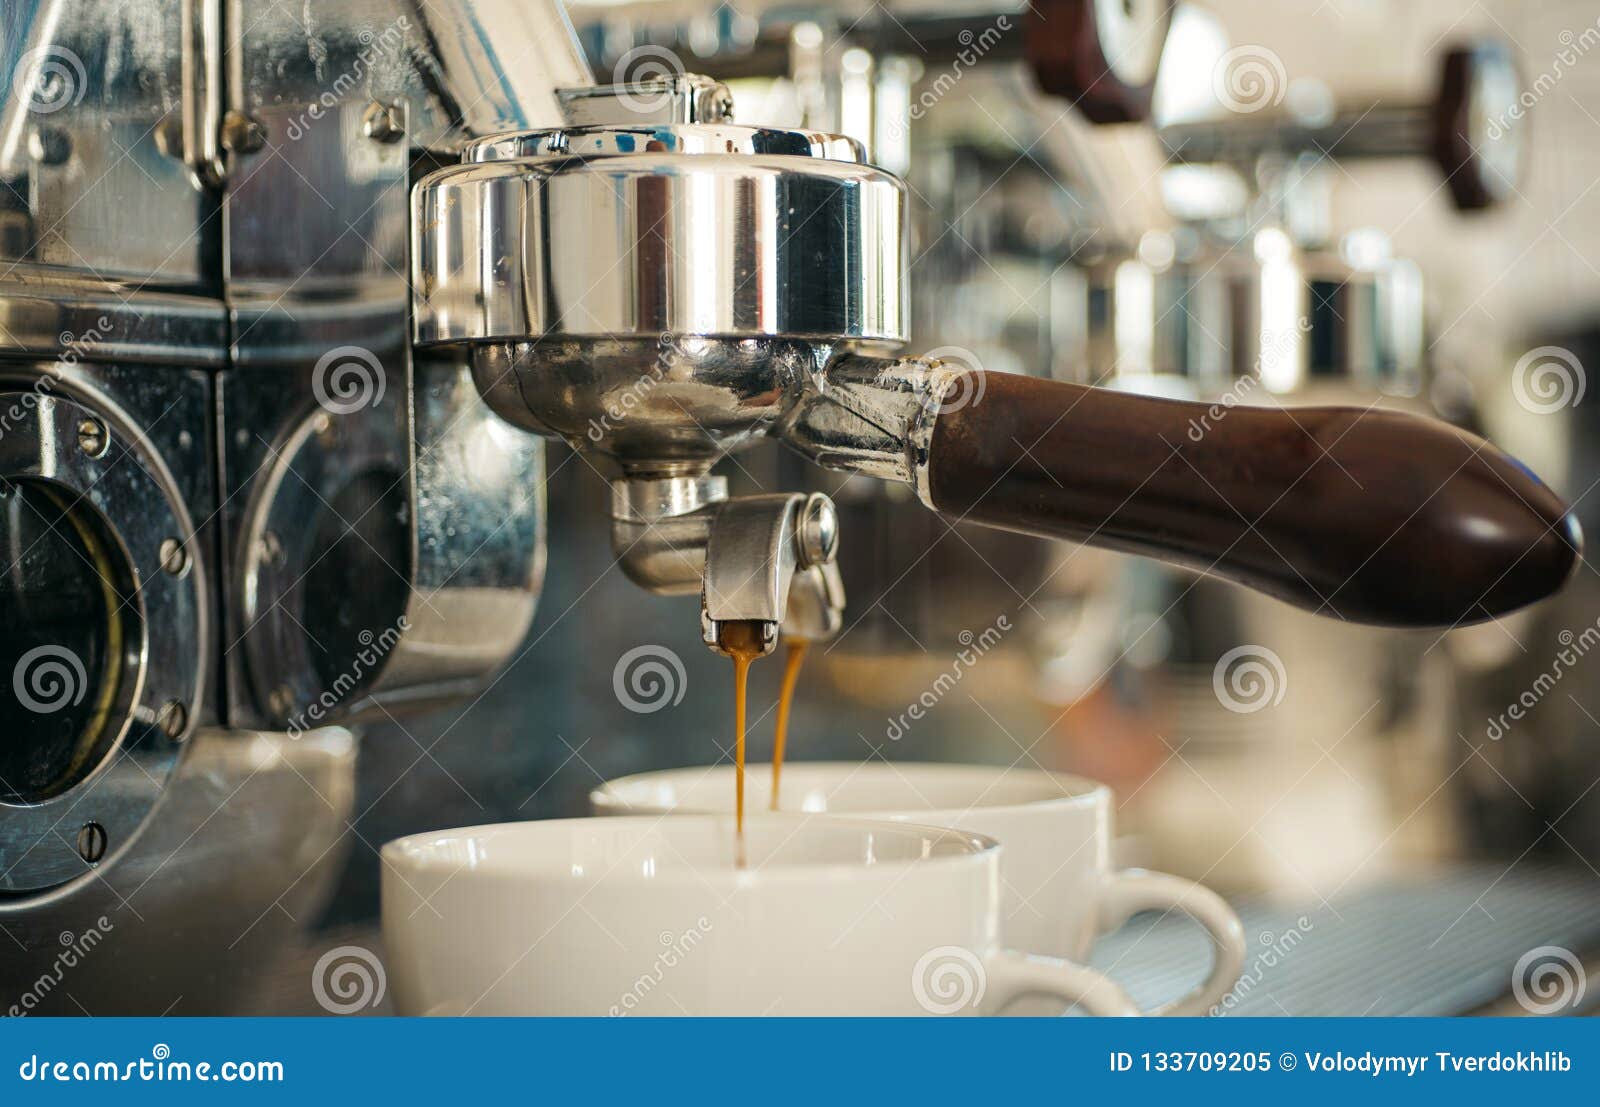 preparing to perfection. small cups to serve hot coffee drinks. coffee cups. coffee being brewed in coffeehouse or cafe